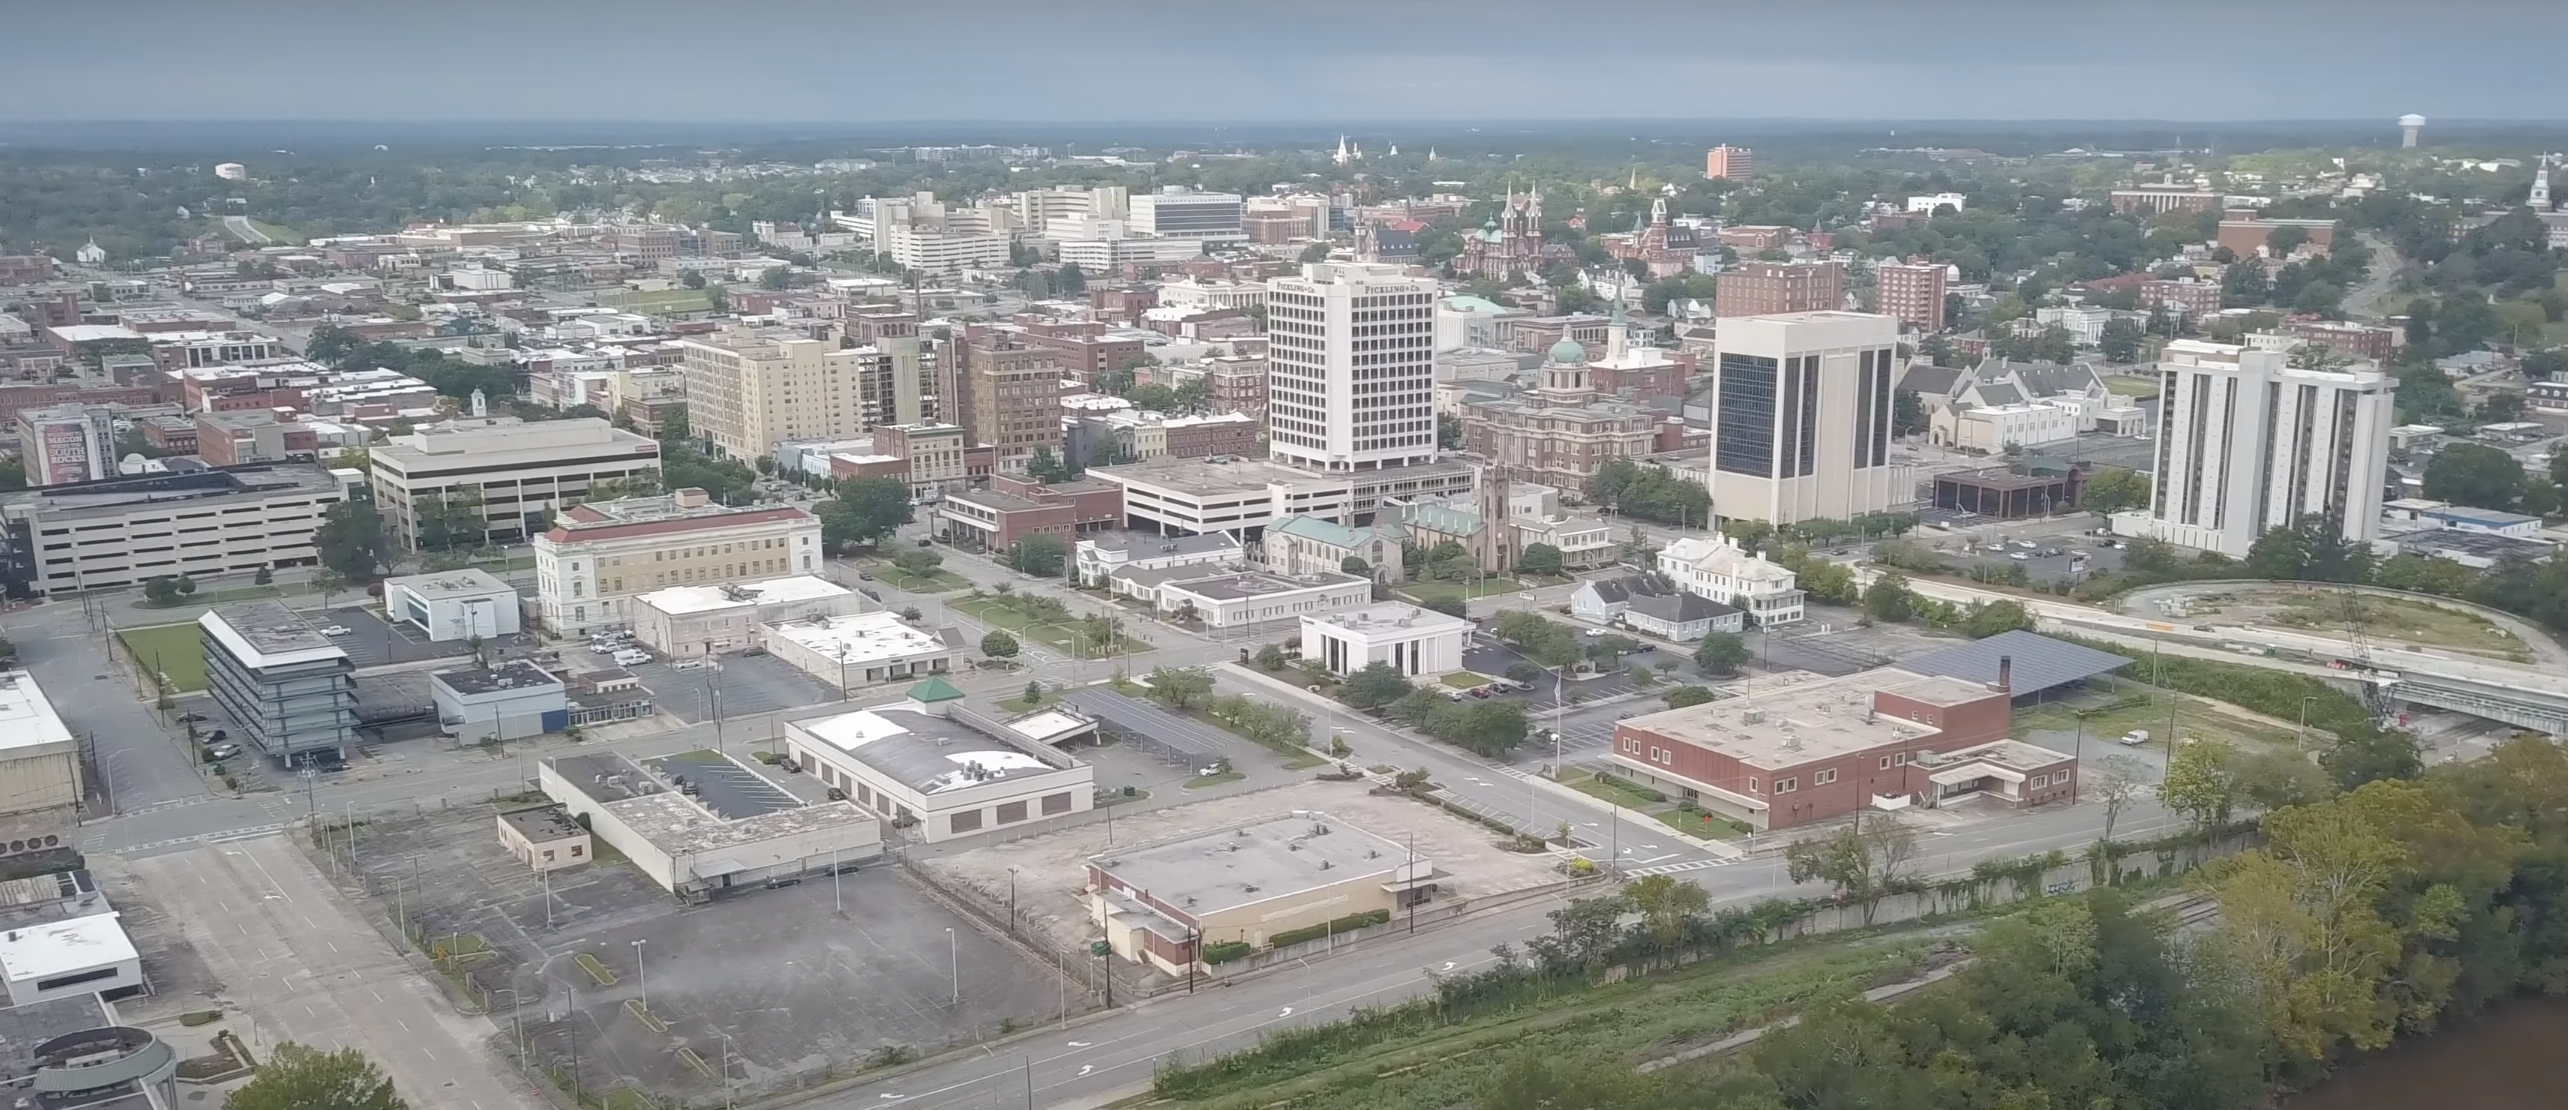 Macon downtown aerial view